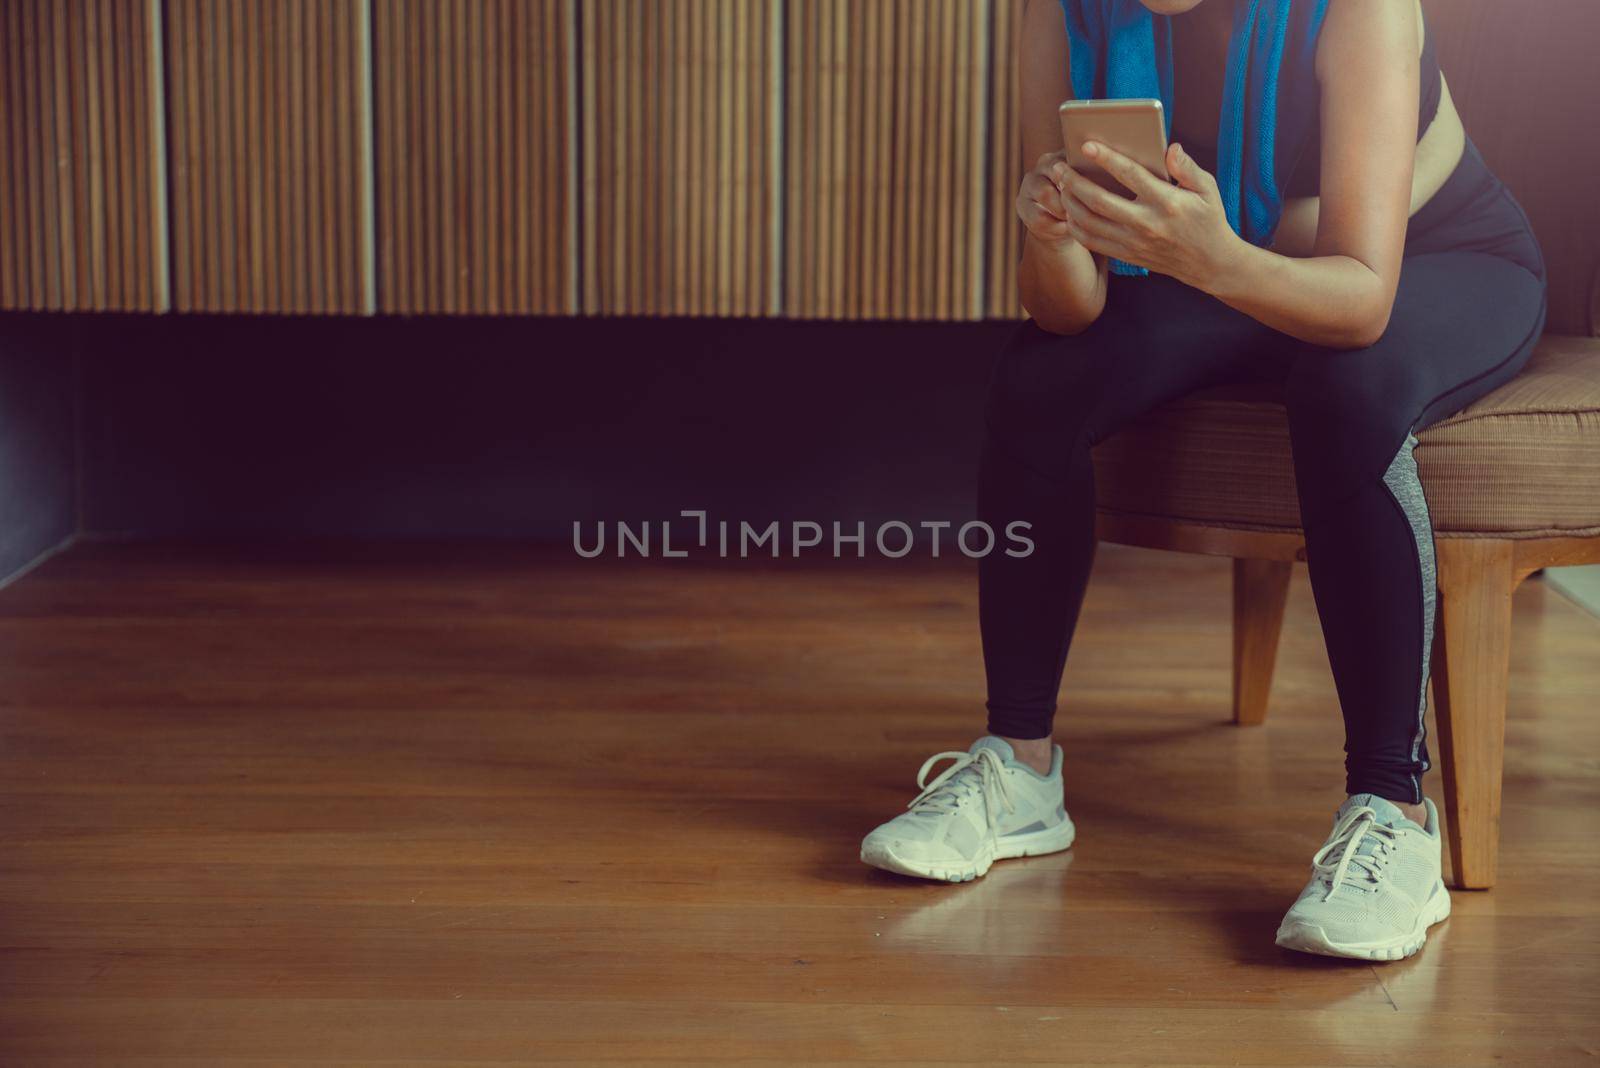 Sportswoman sitting and using smartphone in locker room at gym.